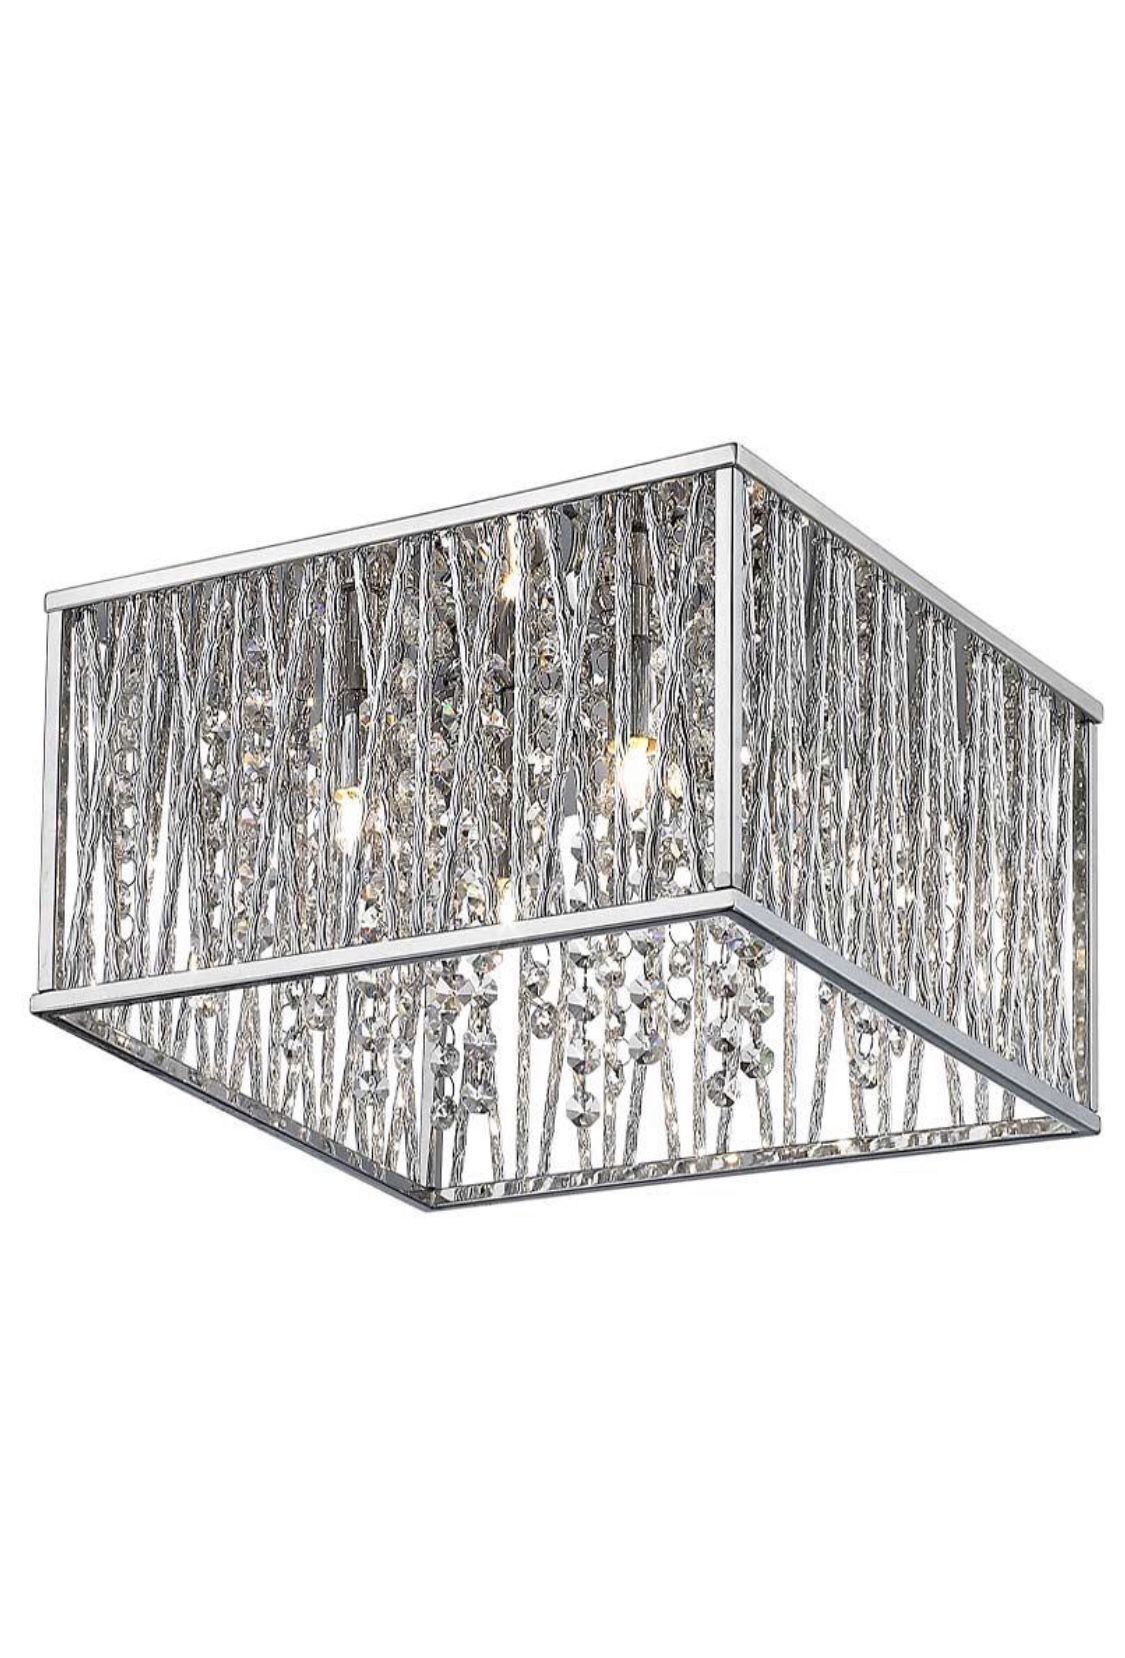 Beautiful Chrome and Crystal 4 Light Fixture - Flush Mount - 16” x 16” x 7.5” - NEW! Cost $220